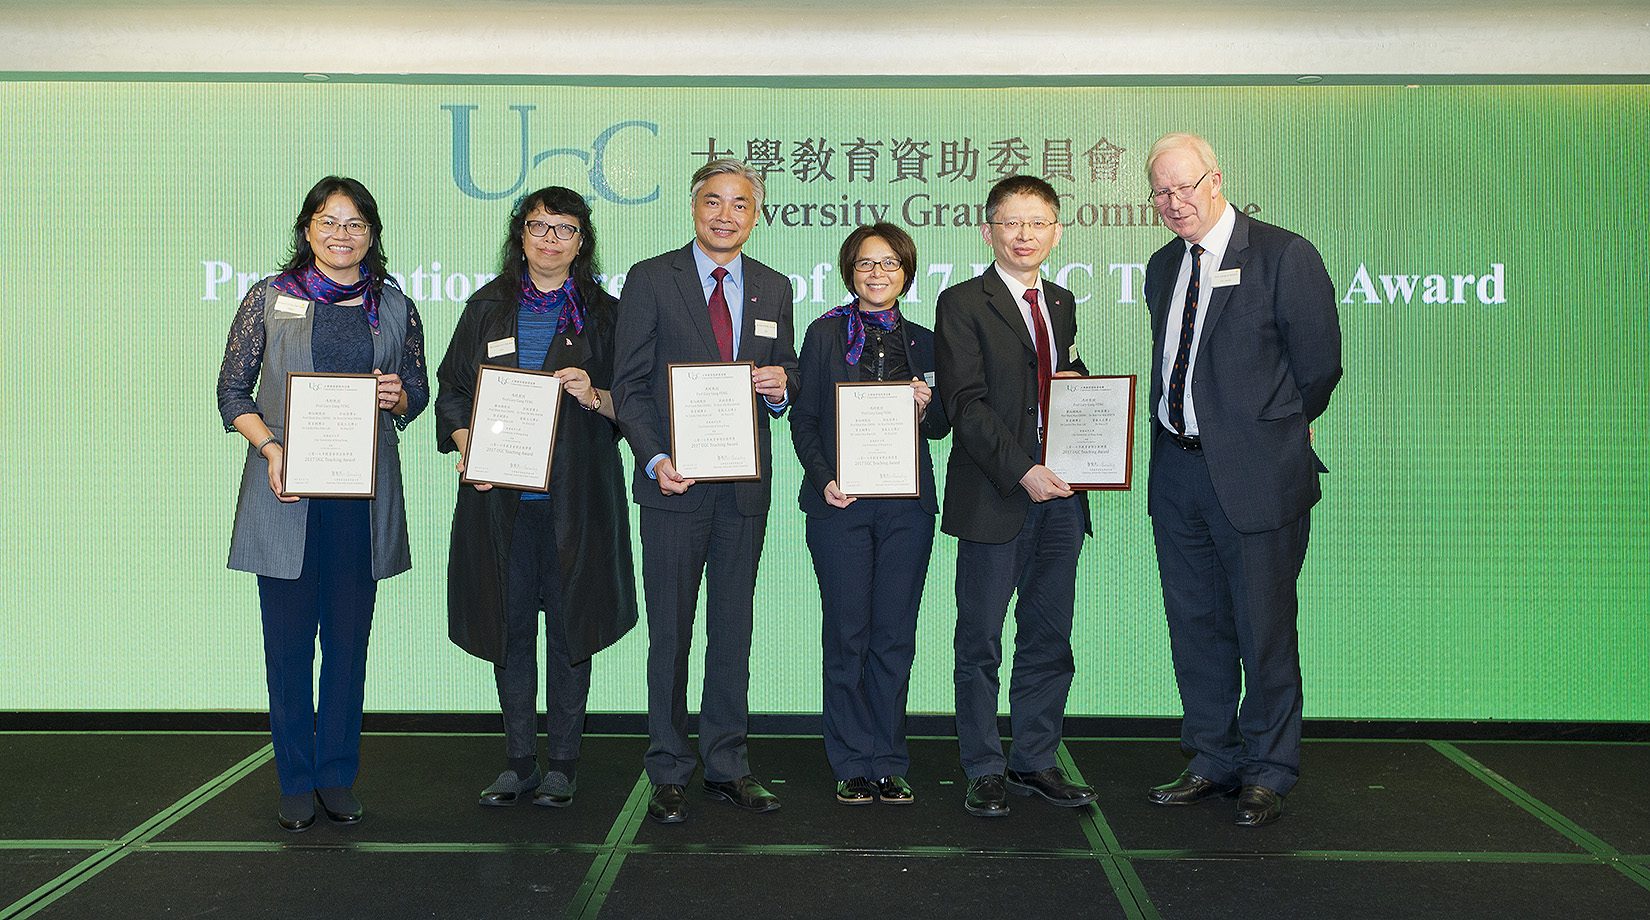 The CityU team receives the award from Professor Dixon (1st from right).